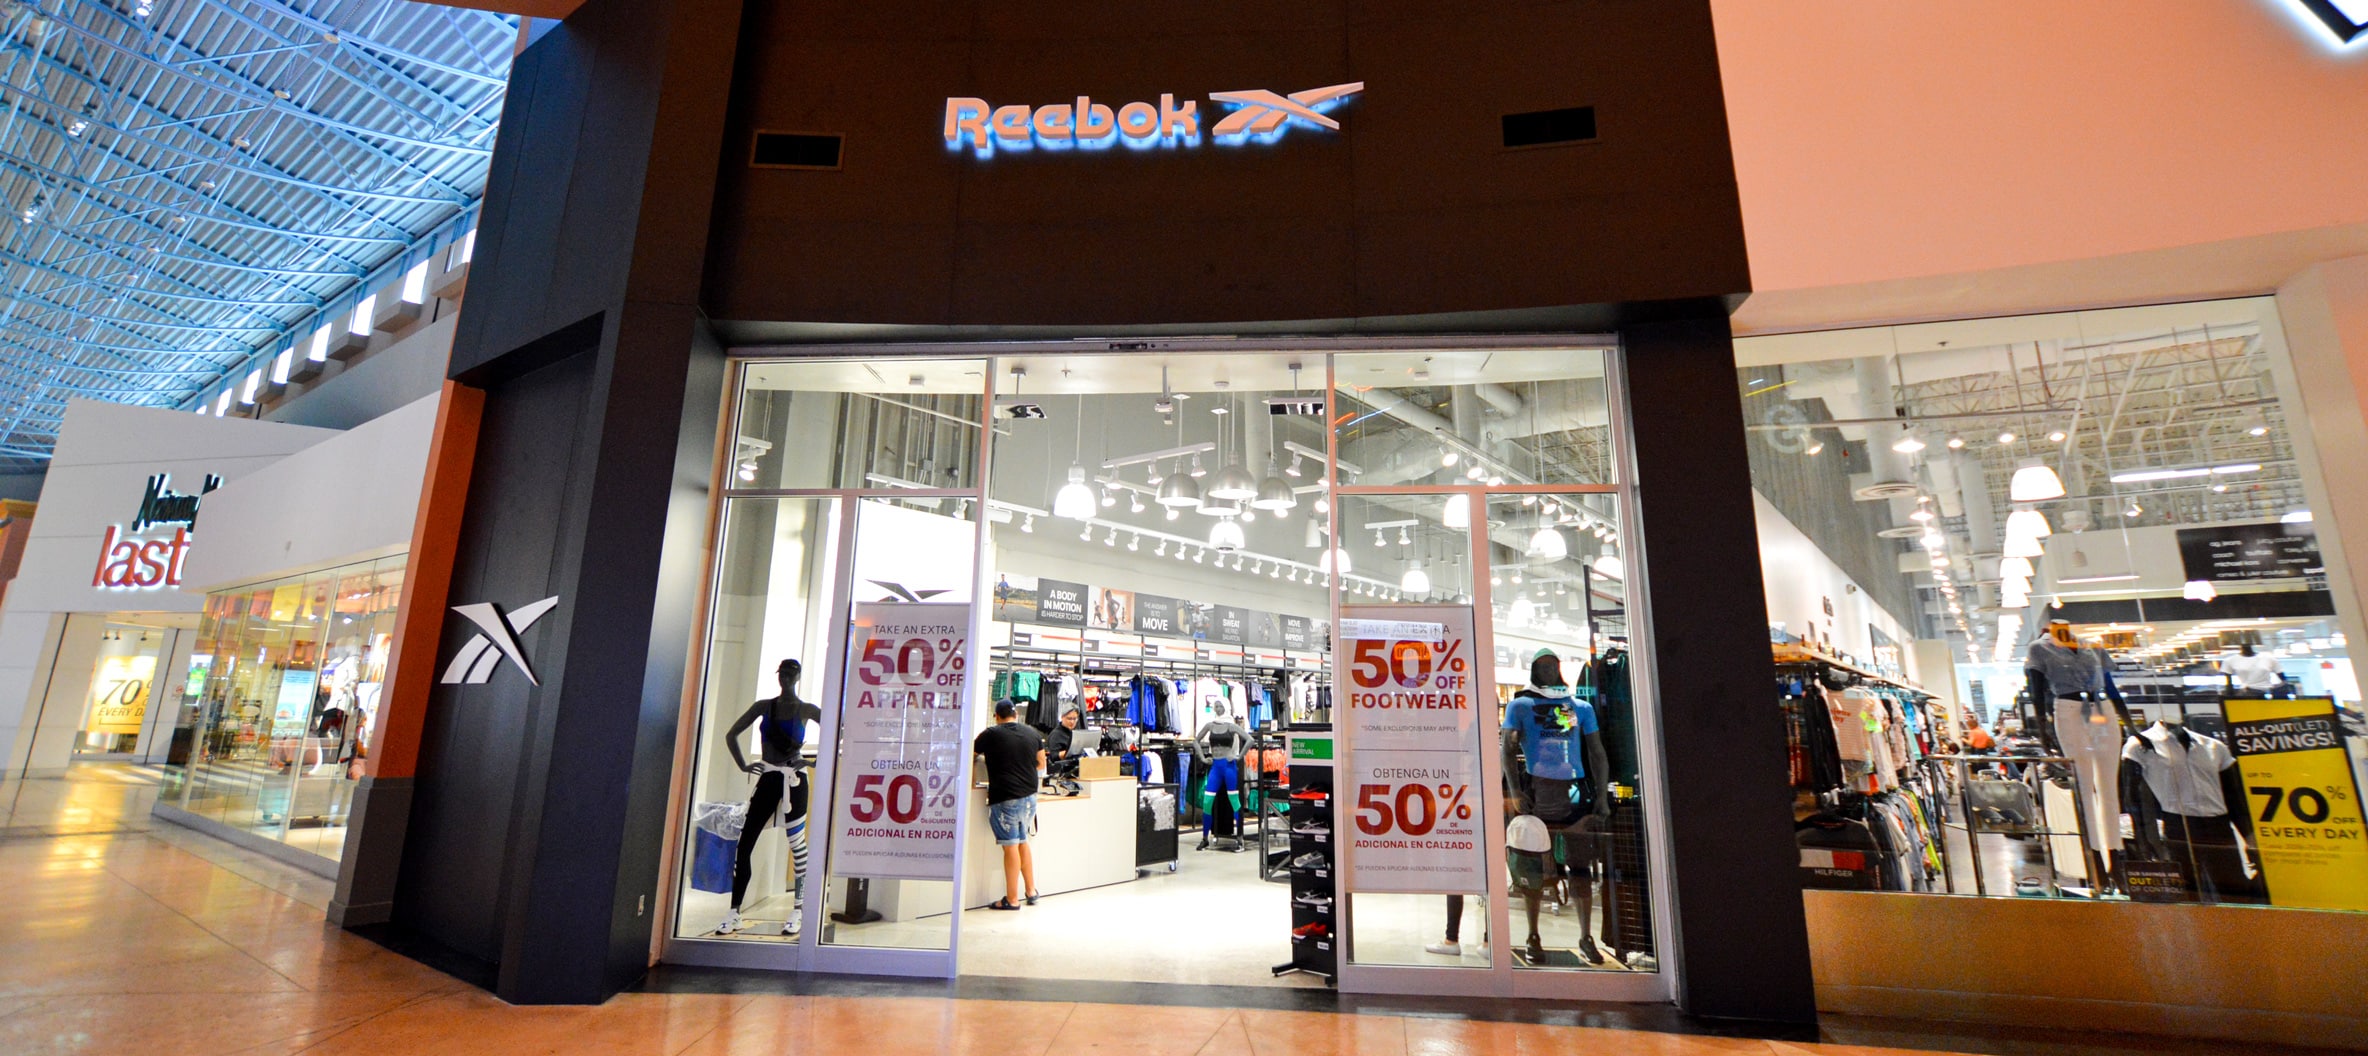 reebok outlet stores near me